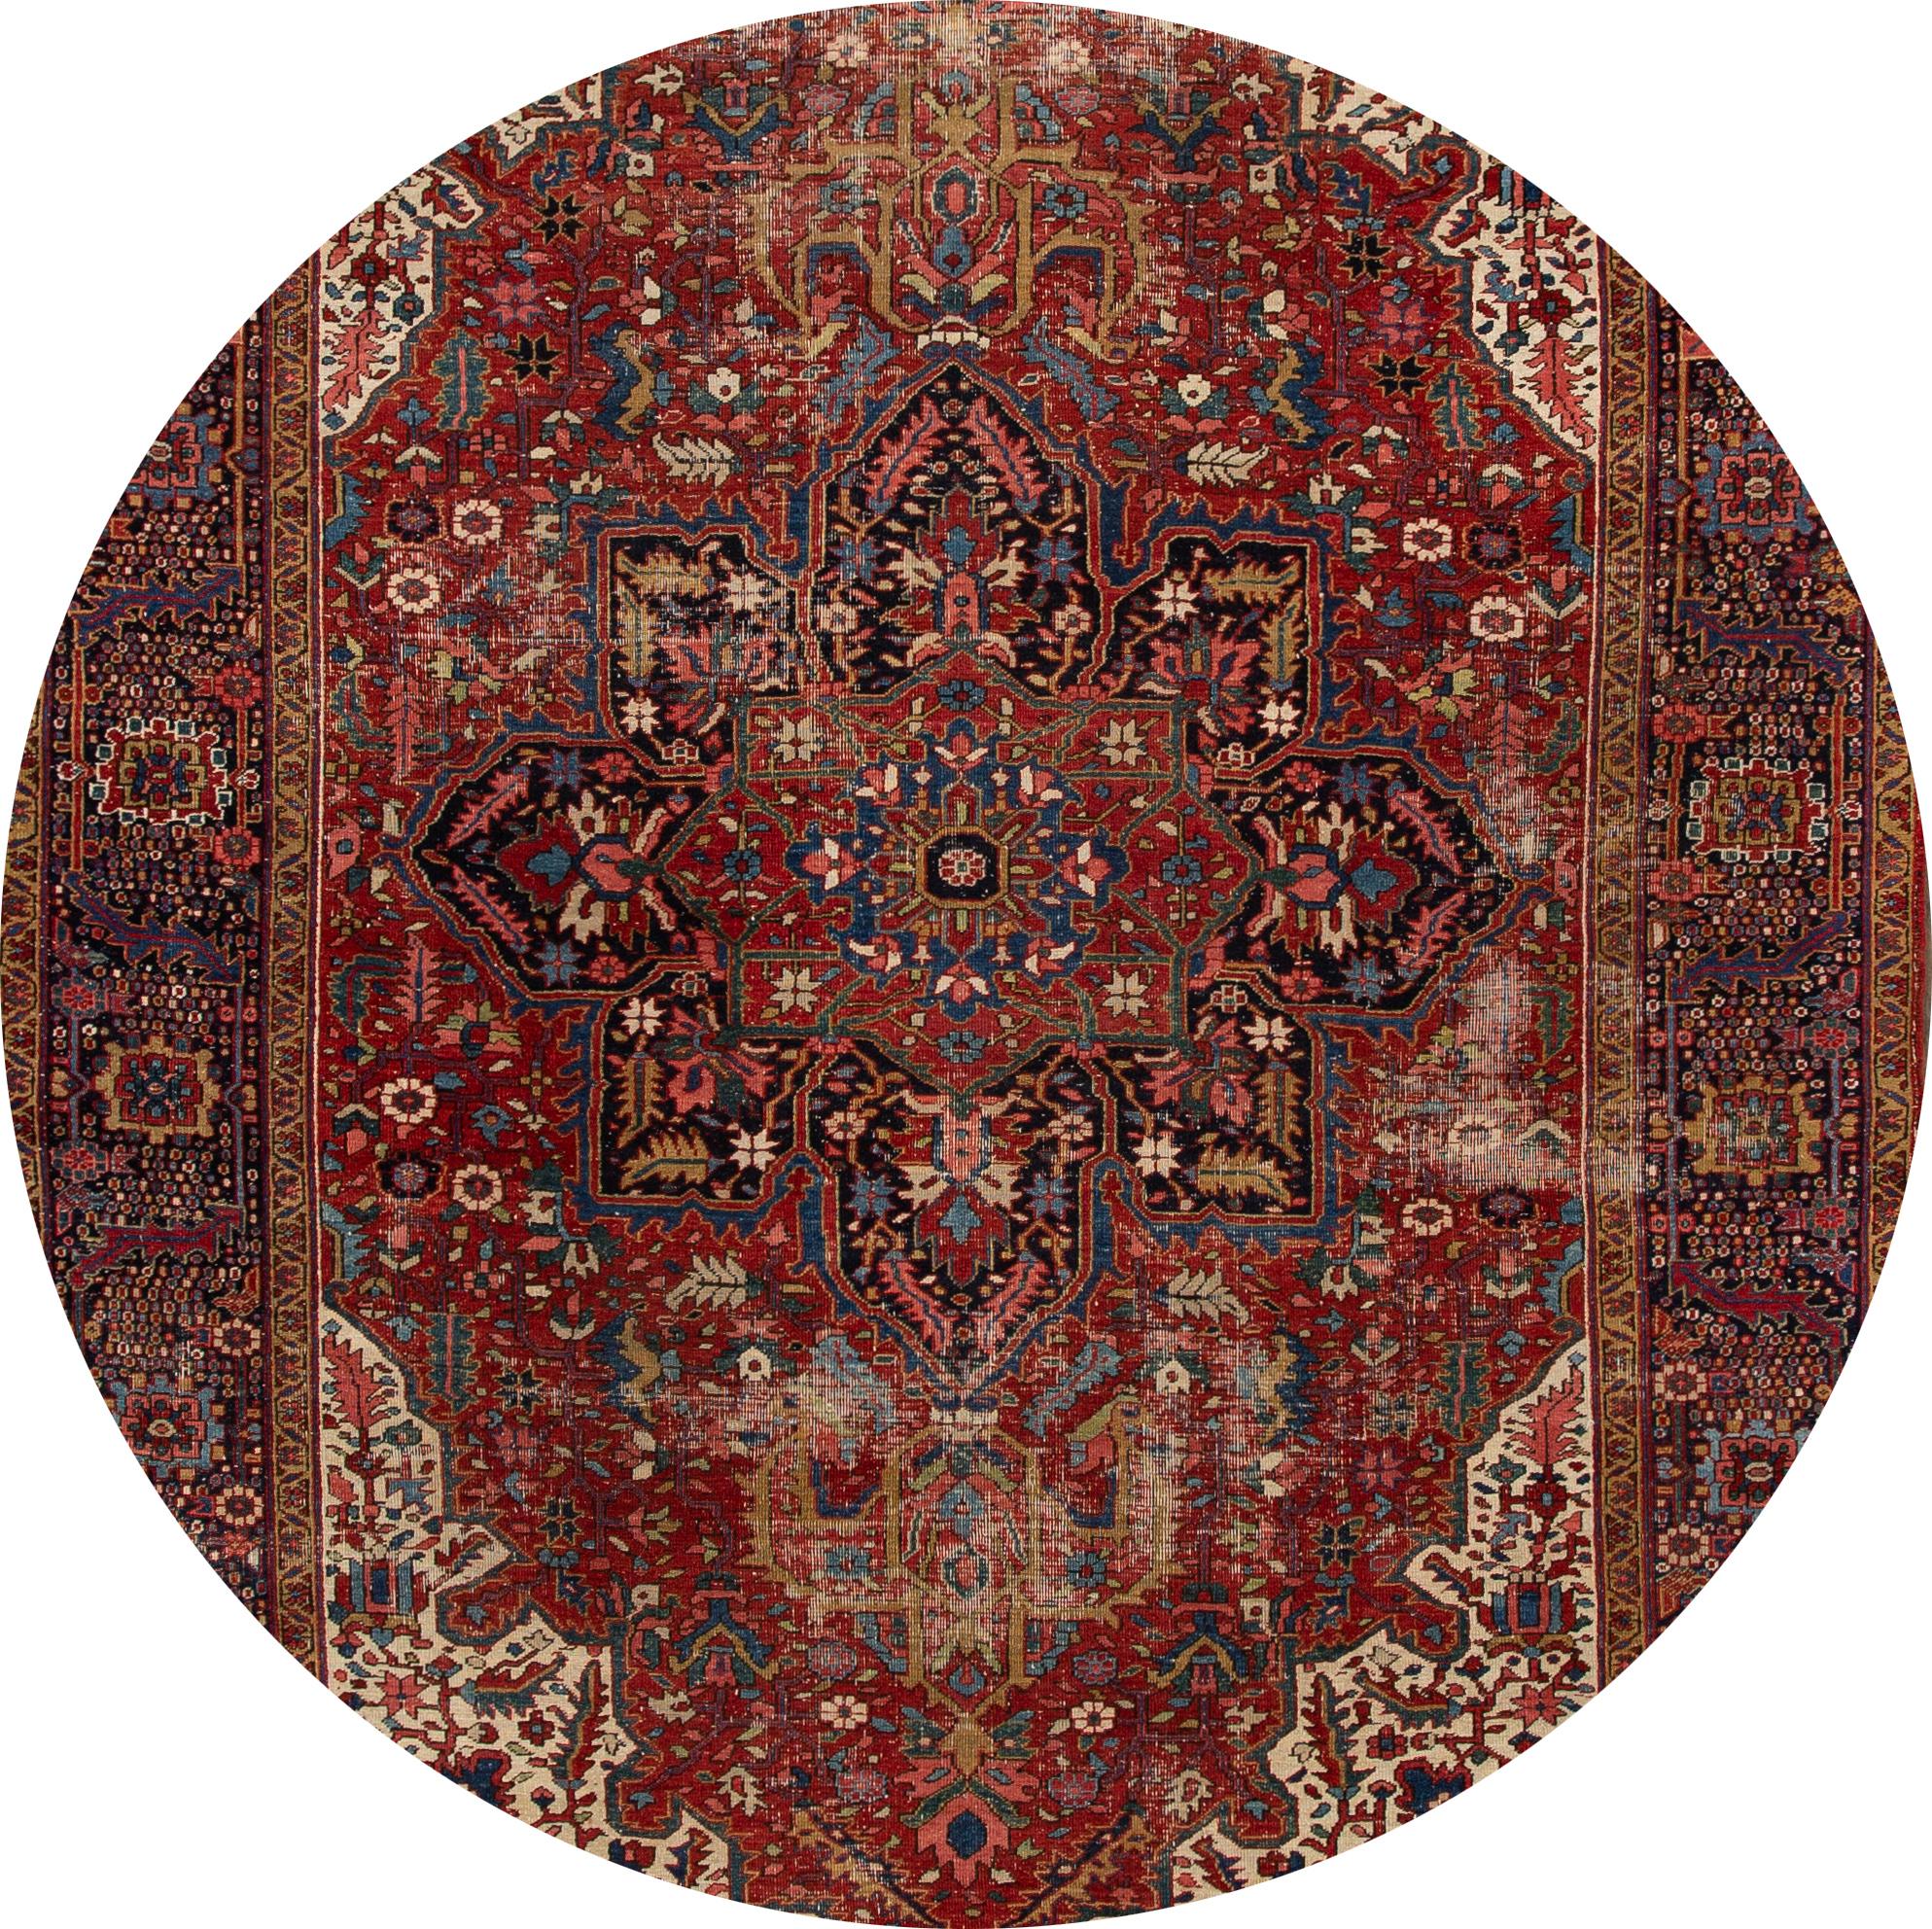 Beautiful hand knotted Persian Heriz wool rug. This rug has a rust field with multicolored accents featuring a traditional all-over design,

circa 1920

This rug measures 8' 7